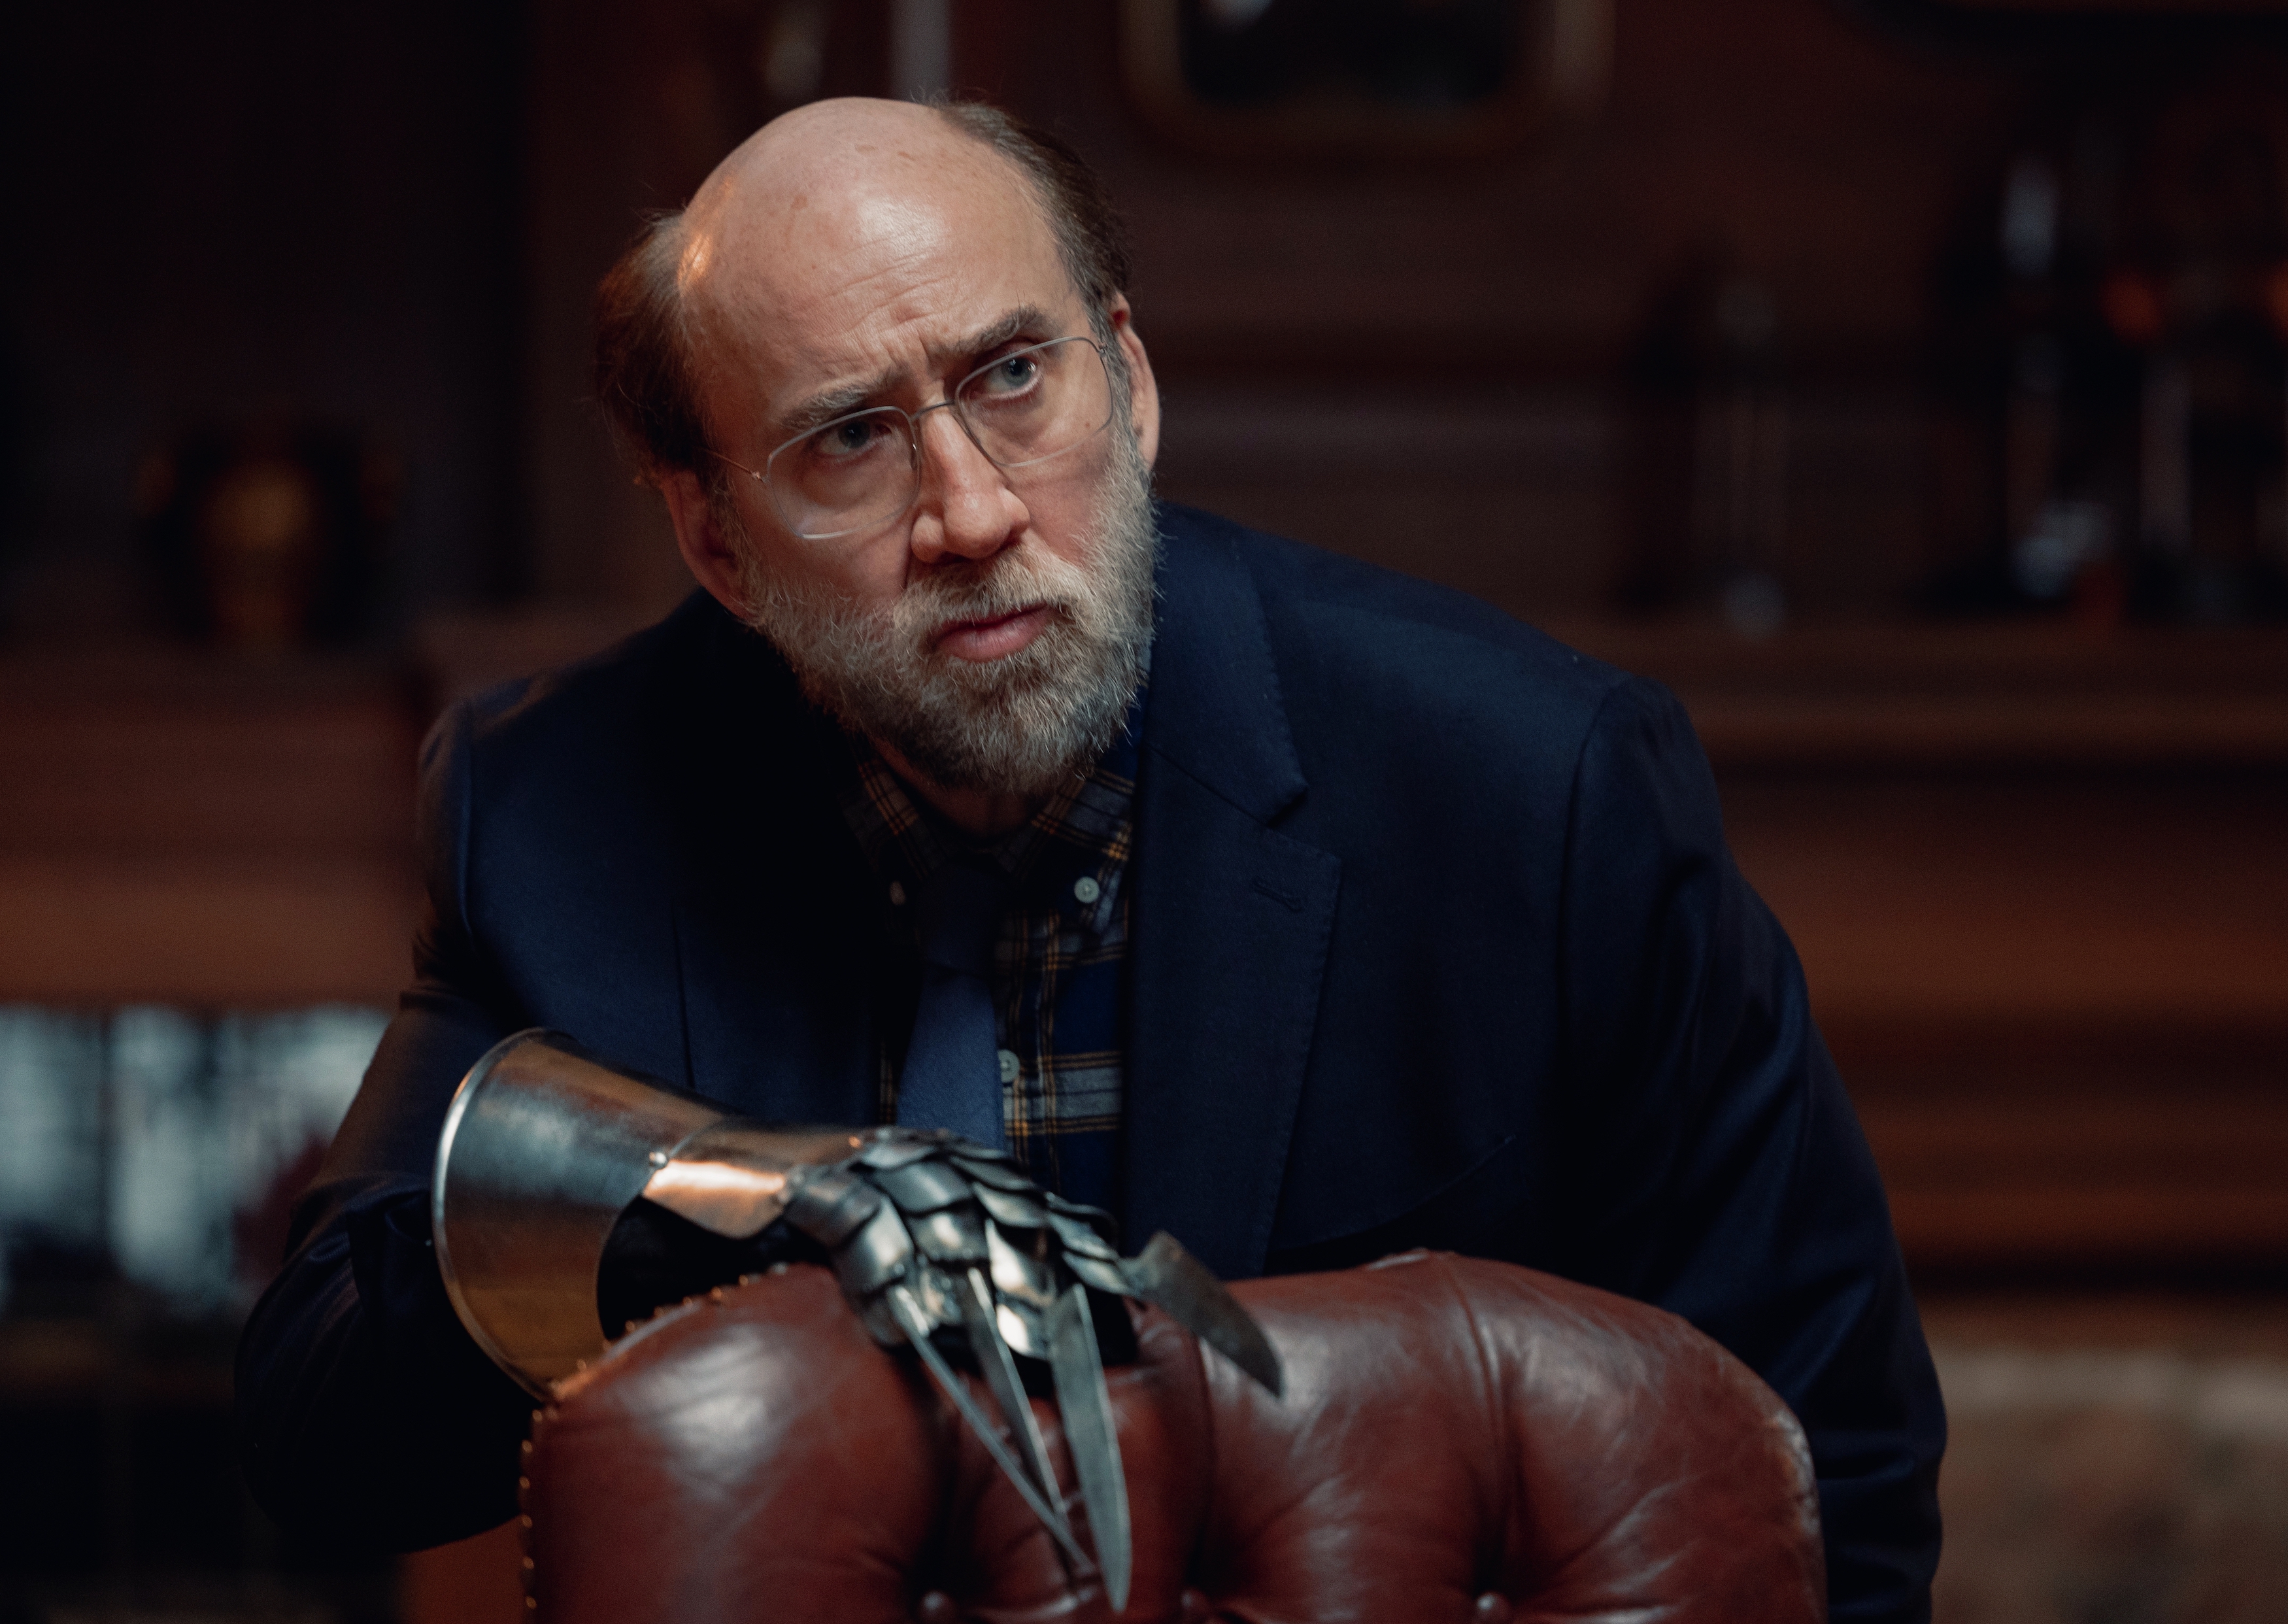 Schlubby professor Paul Matthews (Nicolas Cage) stands in a dark-paneled study in front of a big leather chair, posing with a clawed metal glove vaguely reminiscent of Freddy Krueger’s in a scene from A24’s Dream Scenario